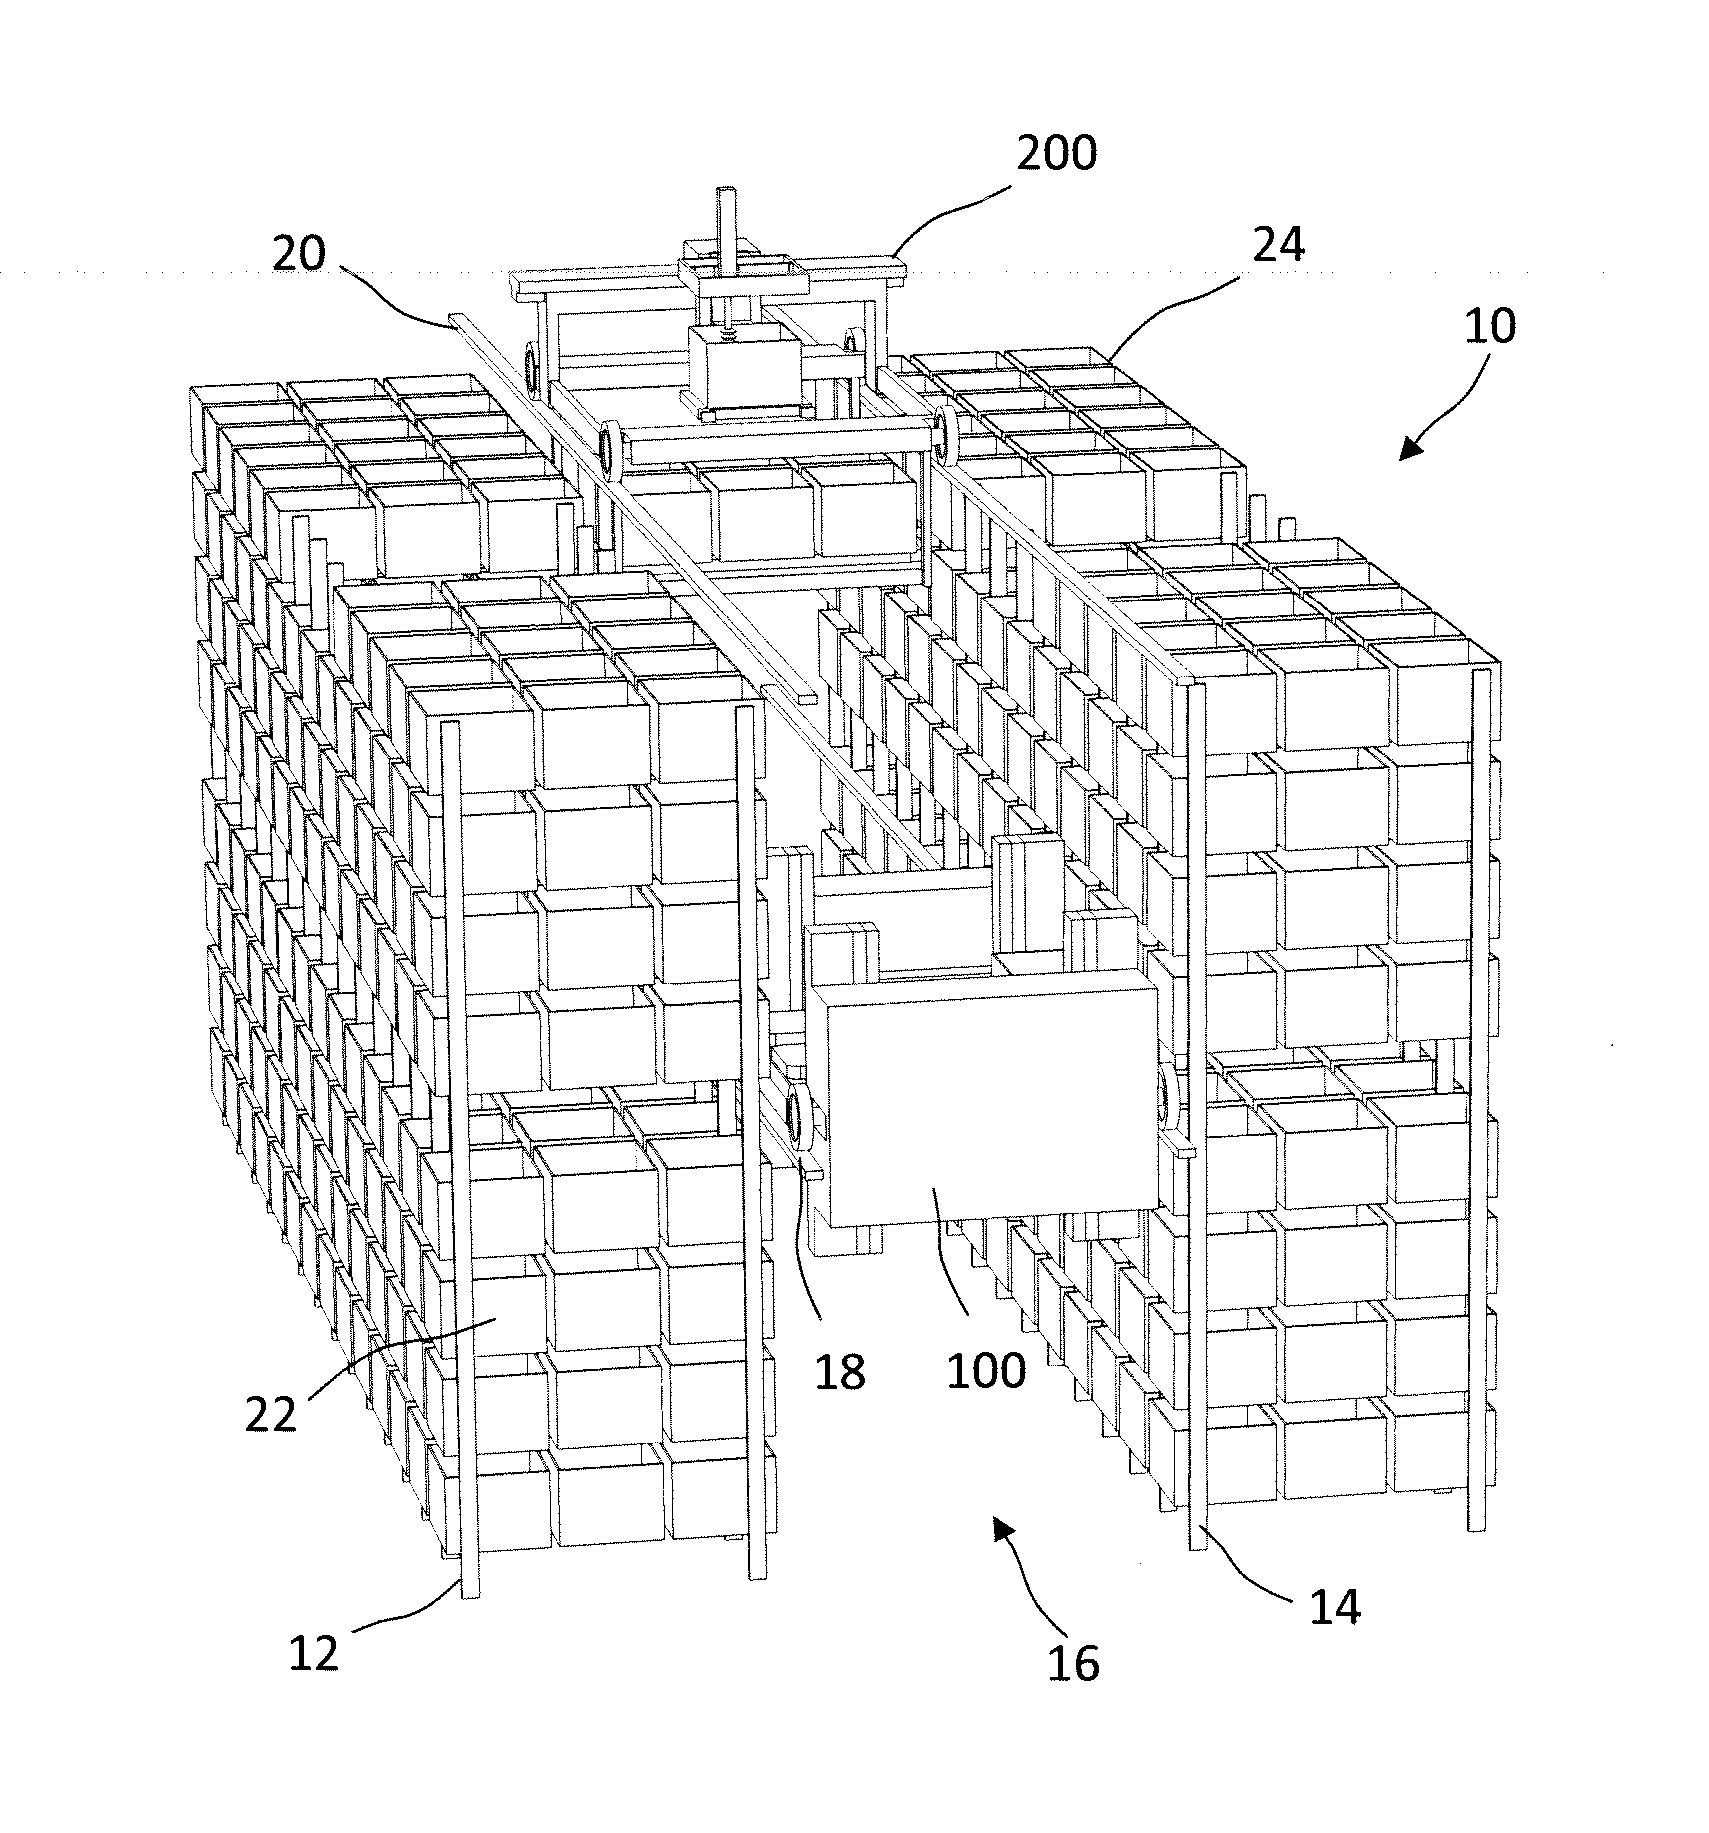 Automatic order picking system and method in retail facility